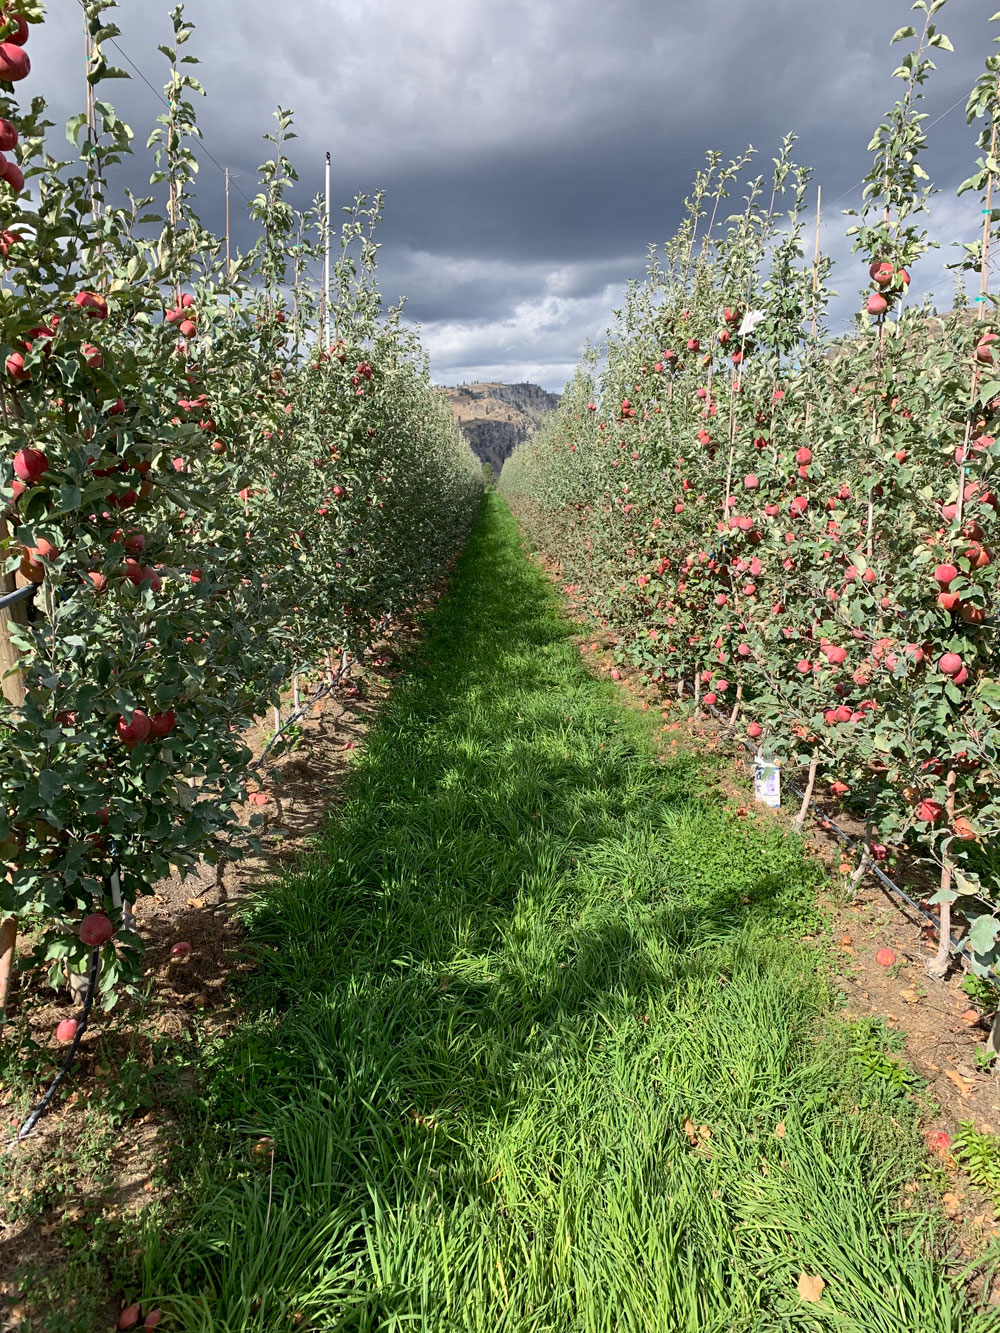 Two rows of apple trees